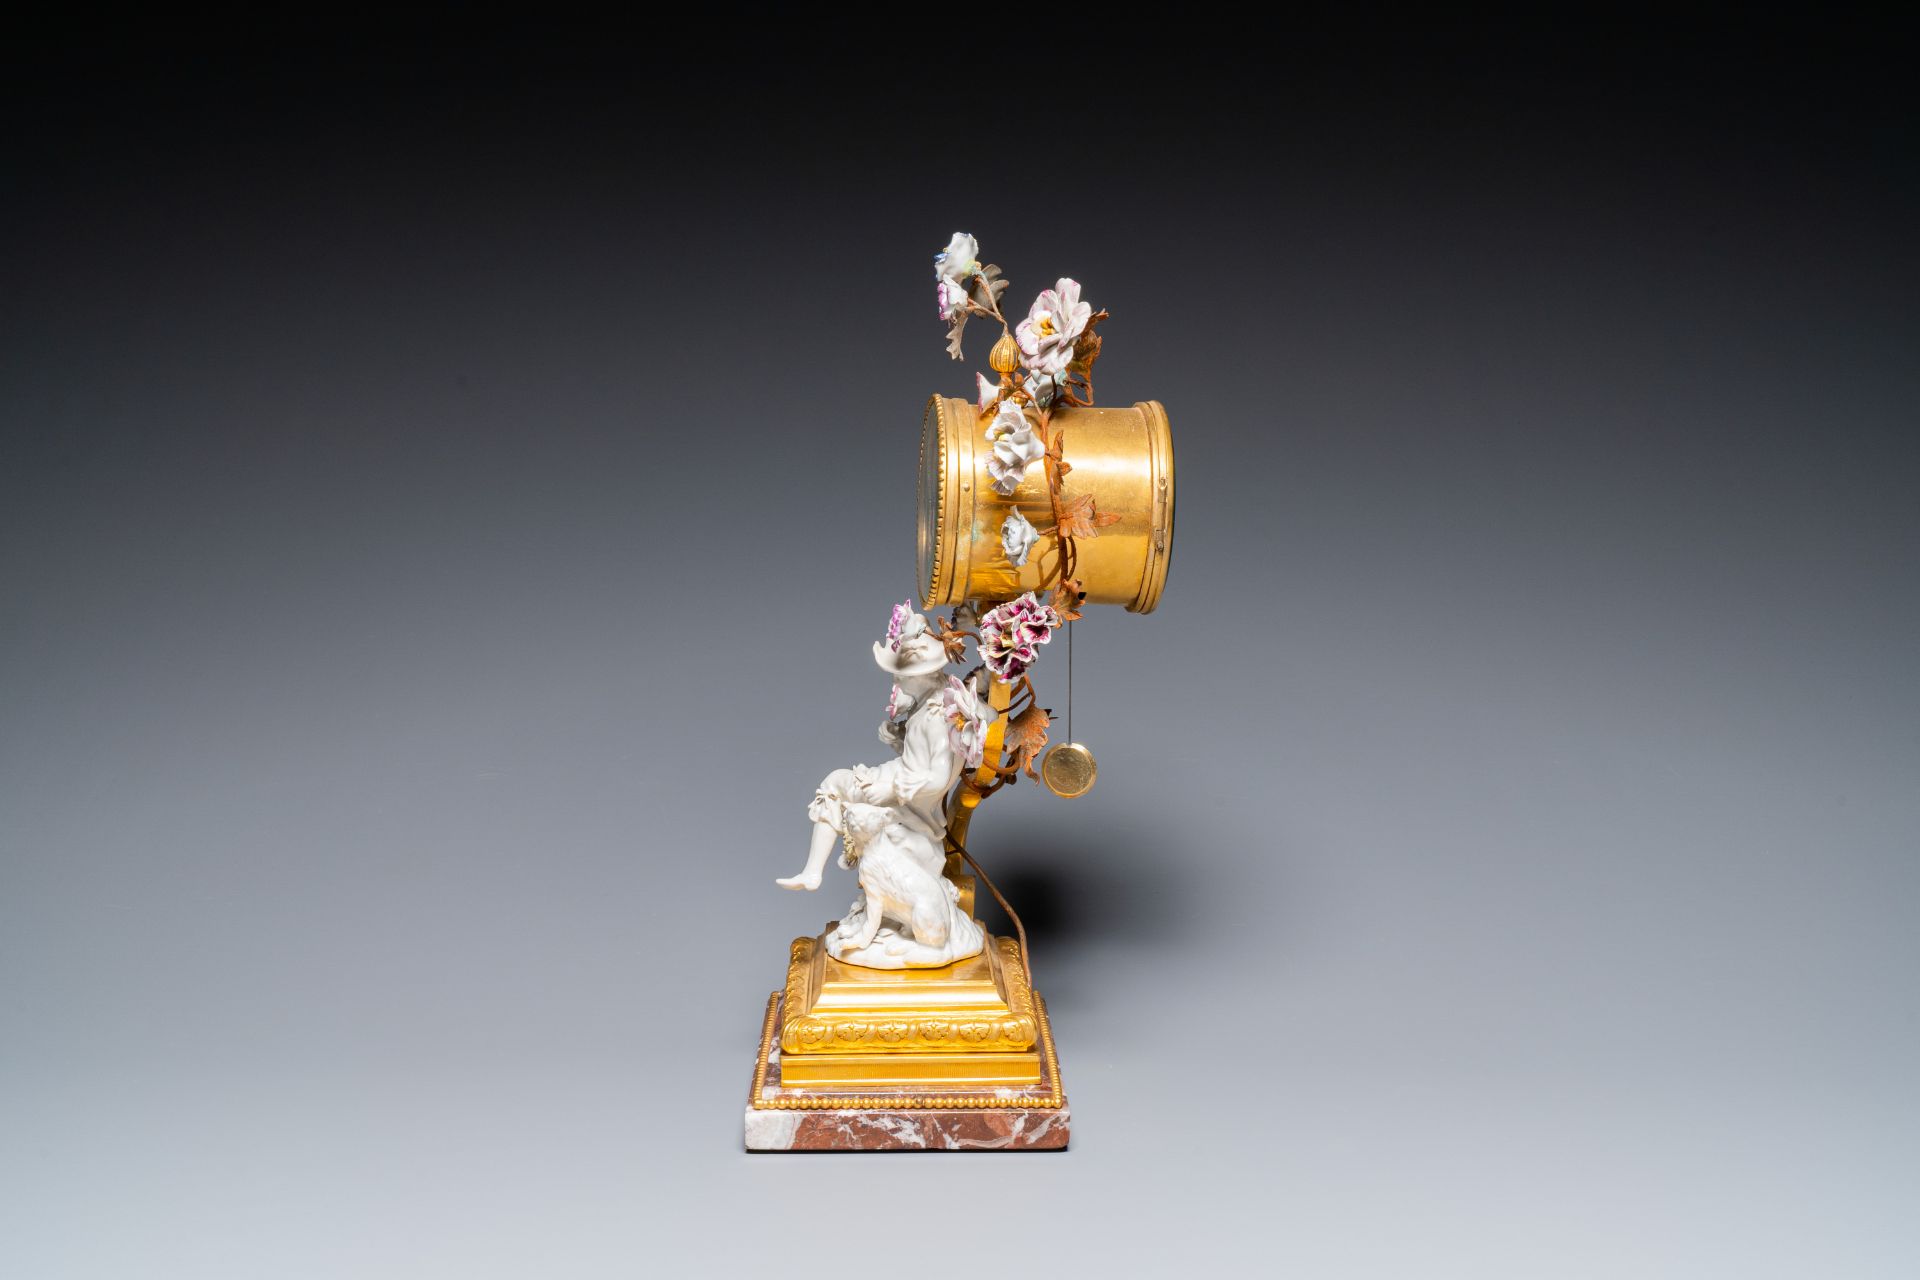 A French ormolu-mounted porcelain mantel clock, 18/19th C. - Image 11 of 28